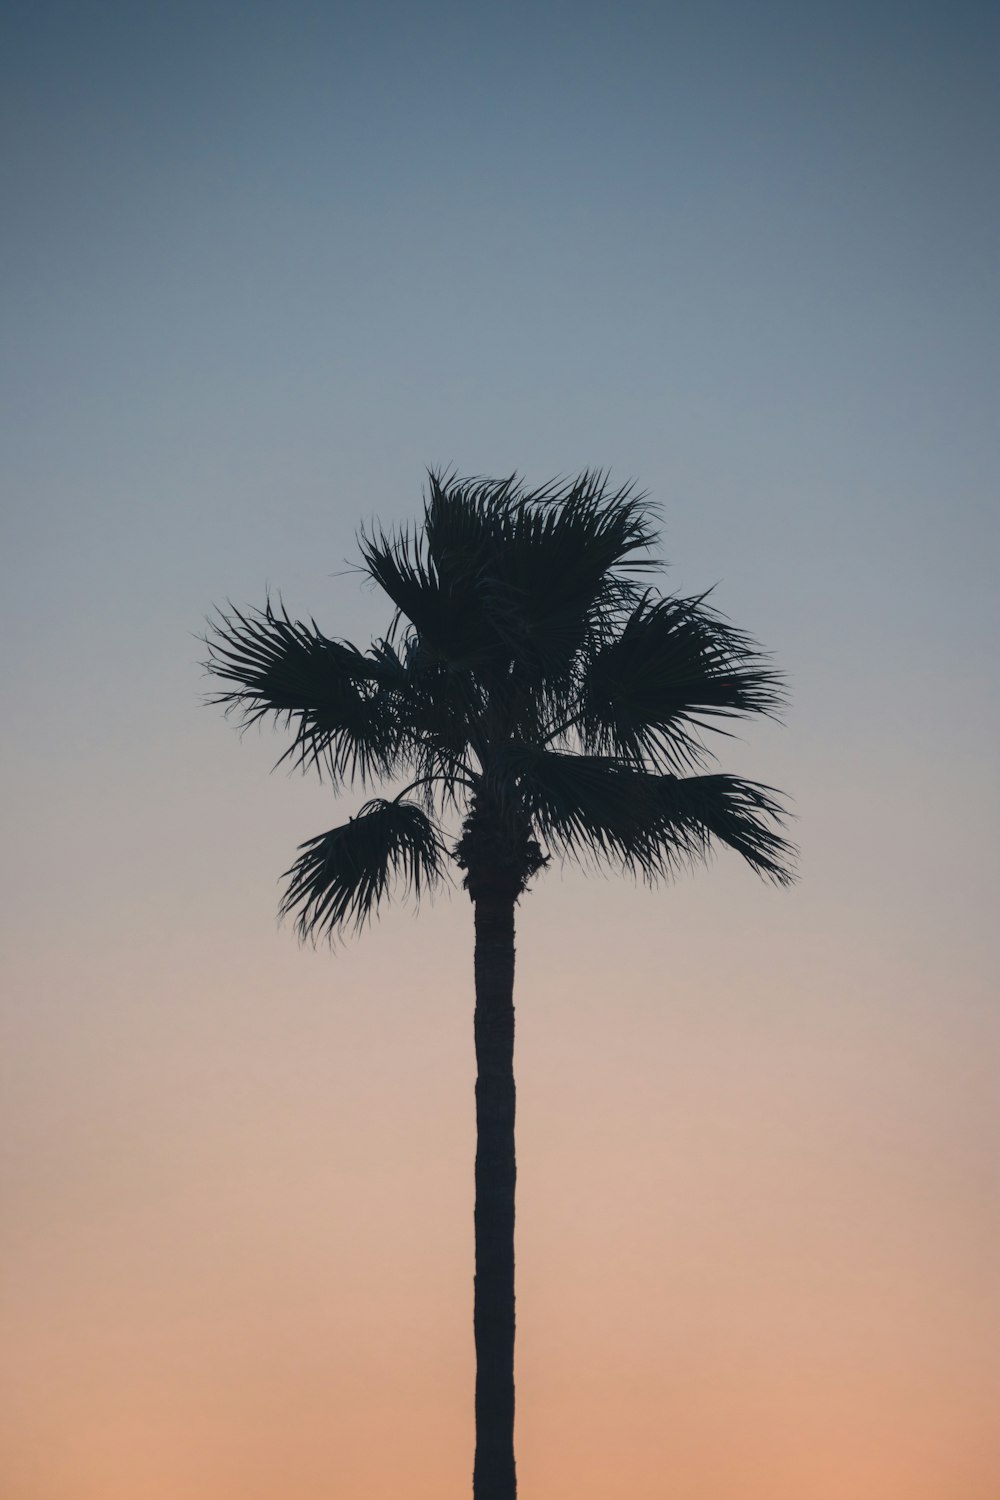 a silhouette of a palm tree against a sunset sky